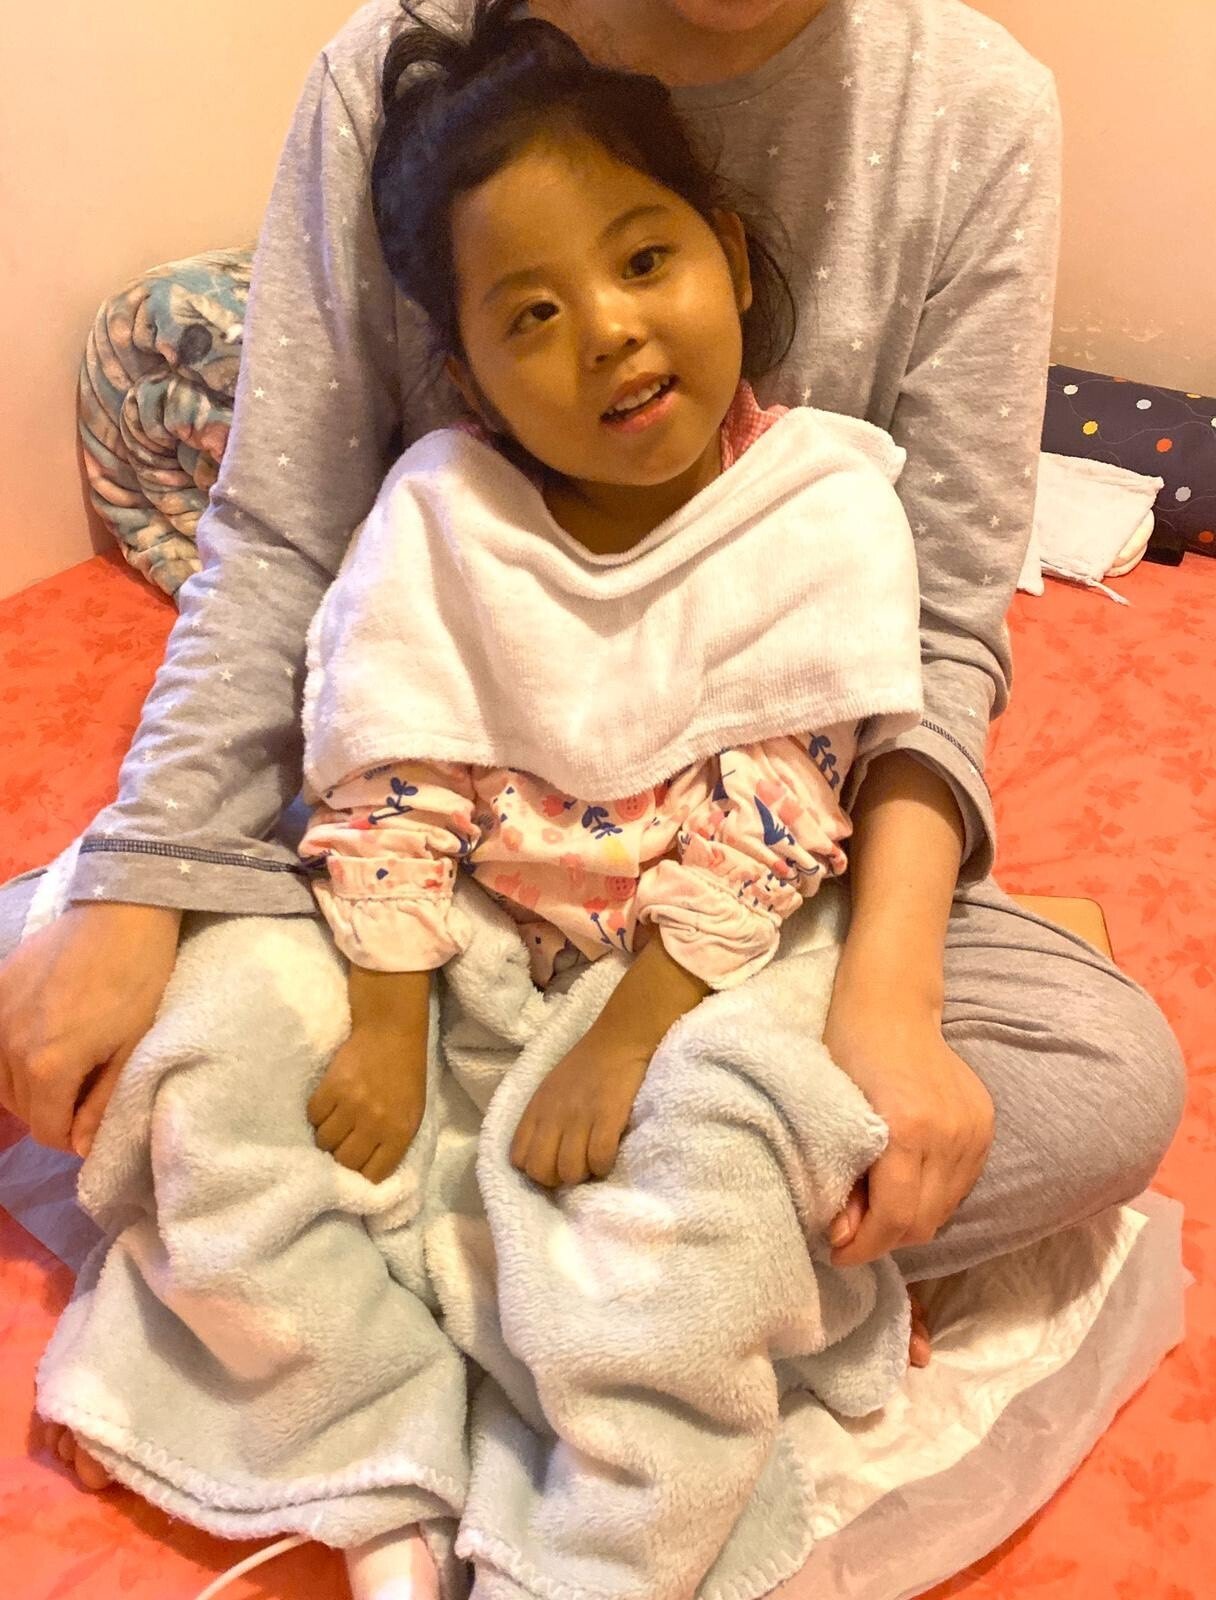 Yu-yan, four, celebrated Christmas and New Year’s Eve at home instead of in hospital, after being discharged because of the coronavirus. Photo: courtesy of Yu-yan’s family